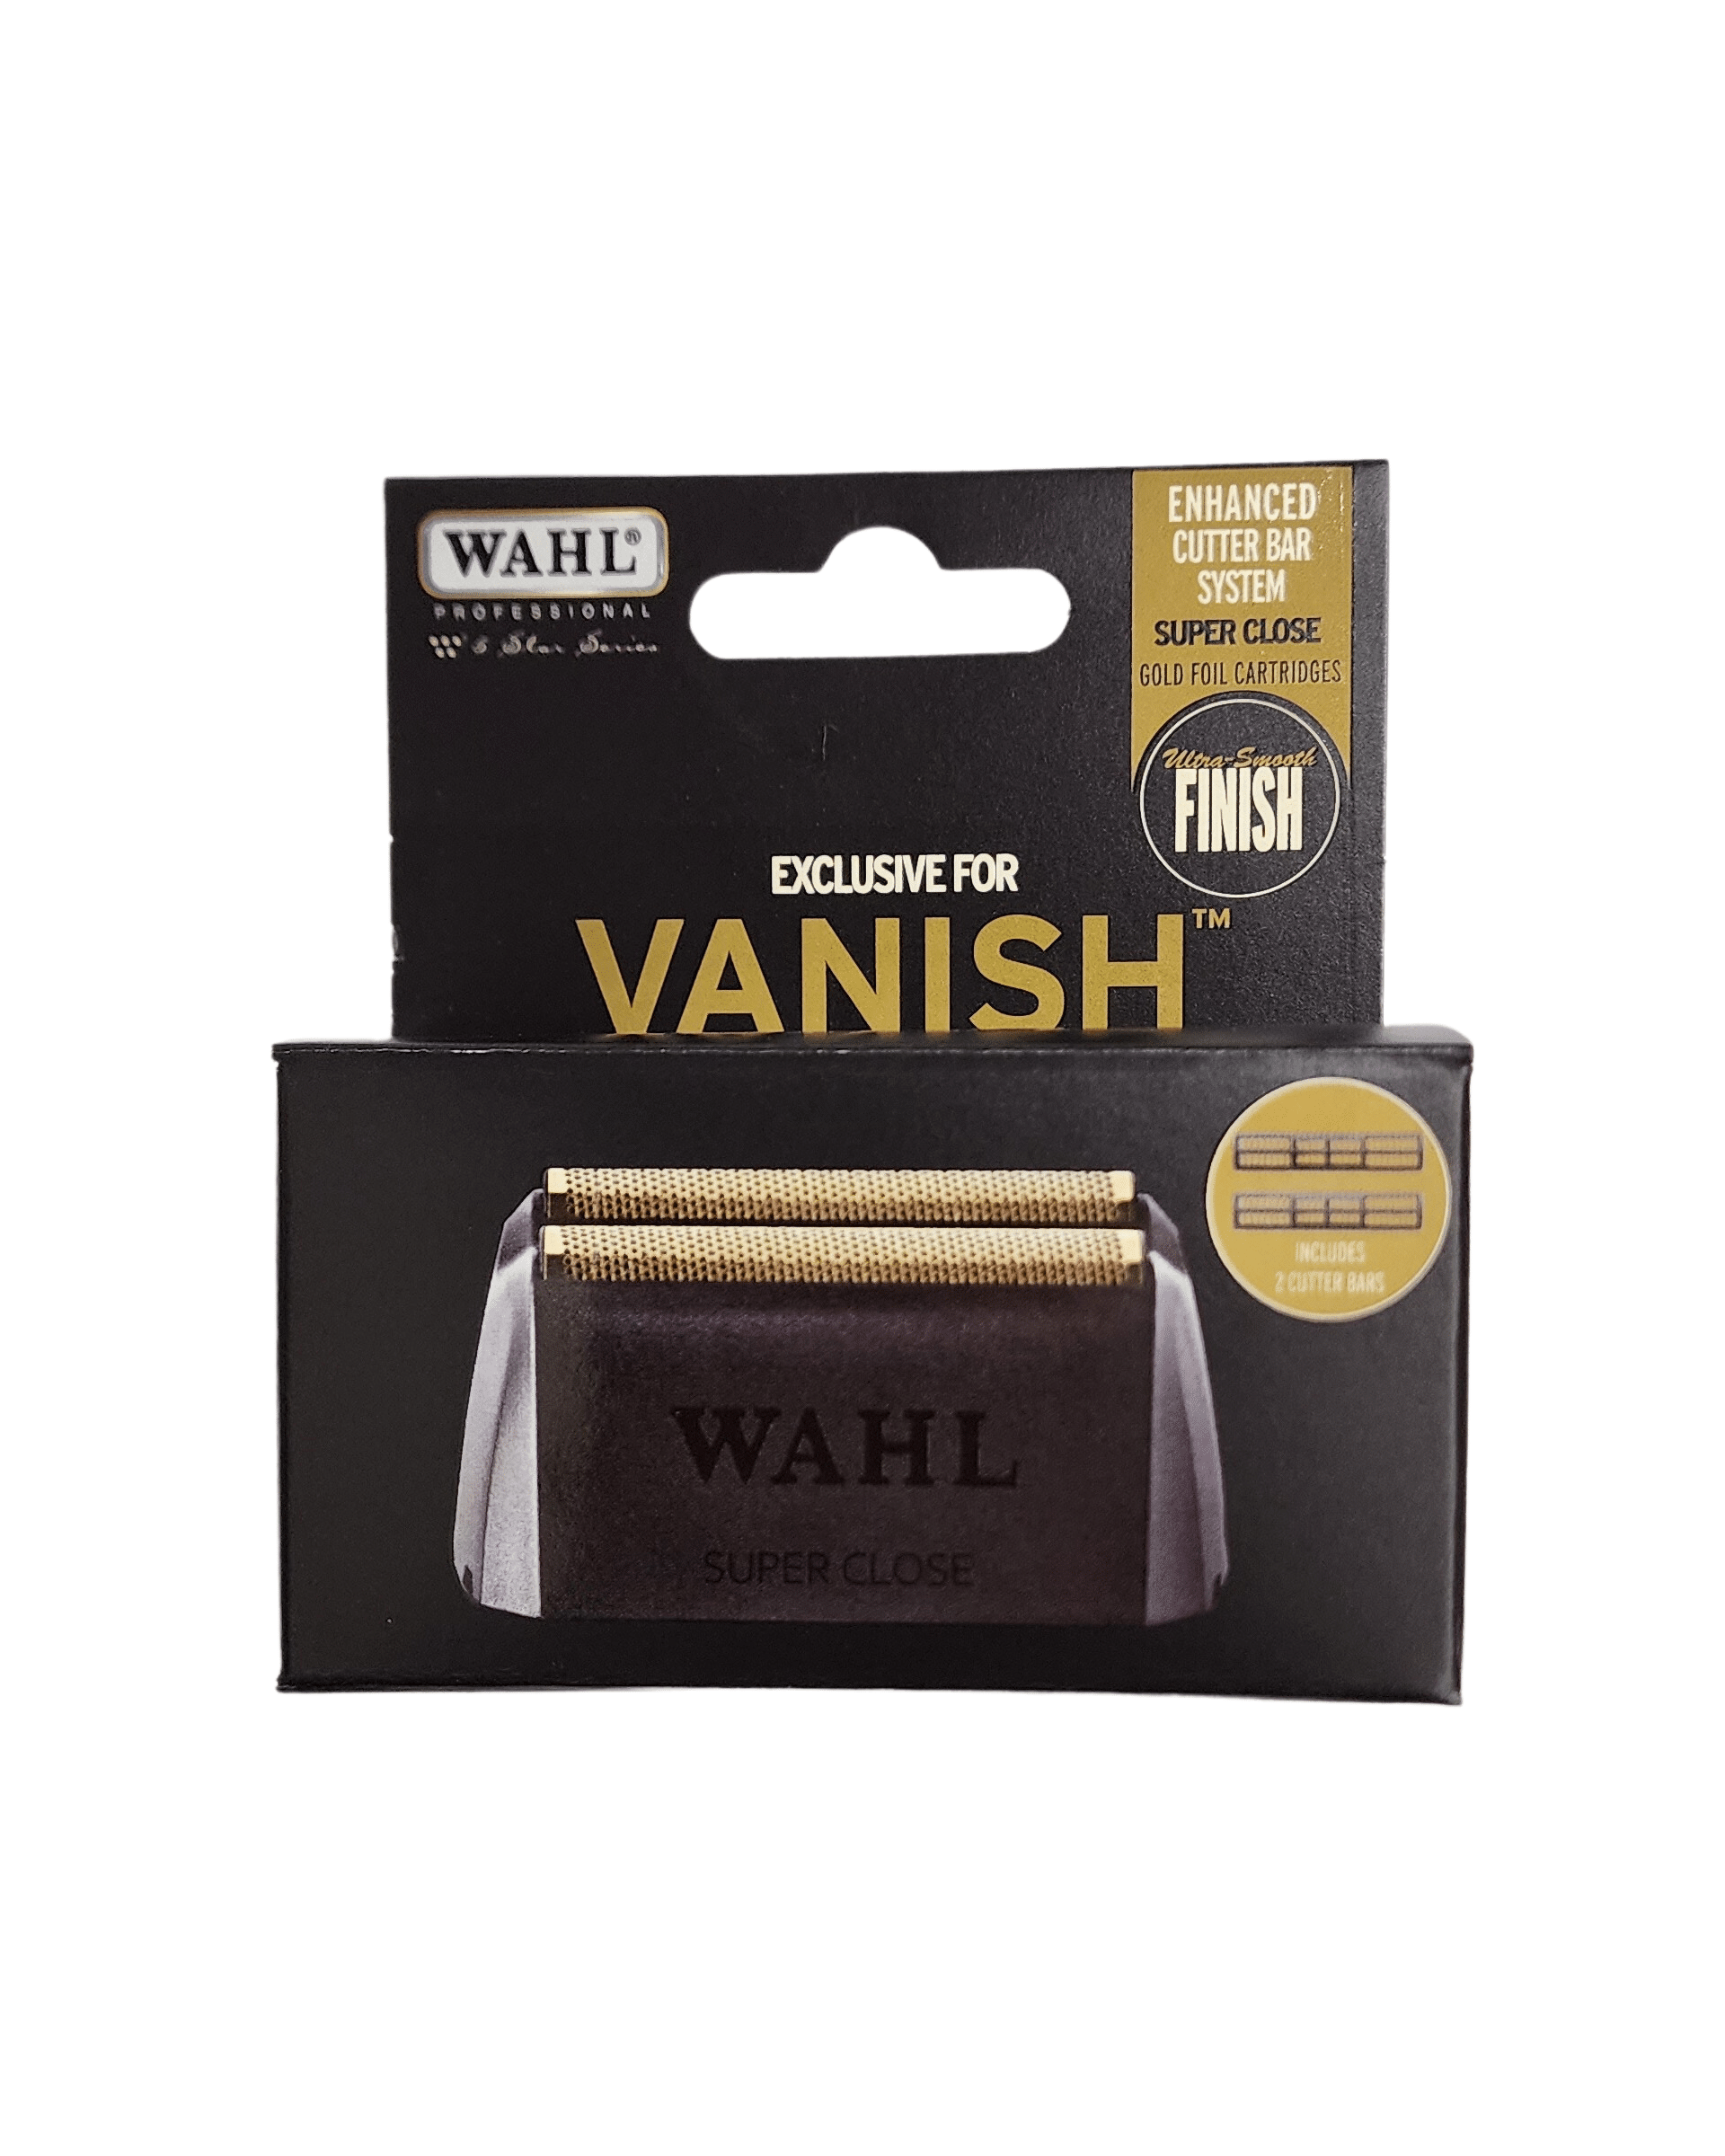 Wahl Vanish Shaver Replacement Foil and Cutter #3022905 - Package Front